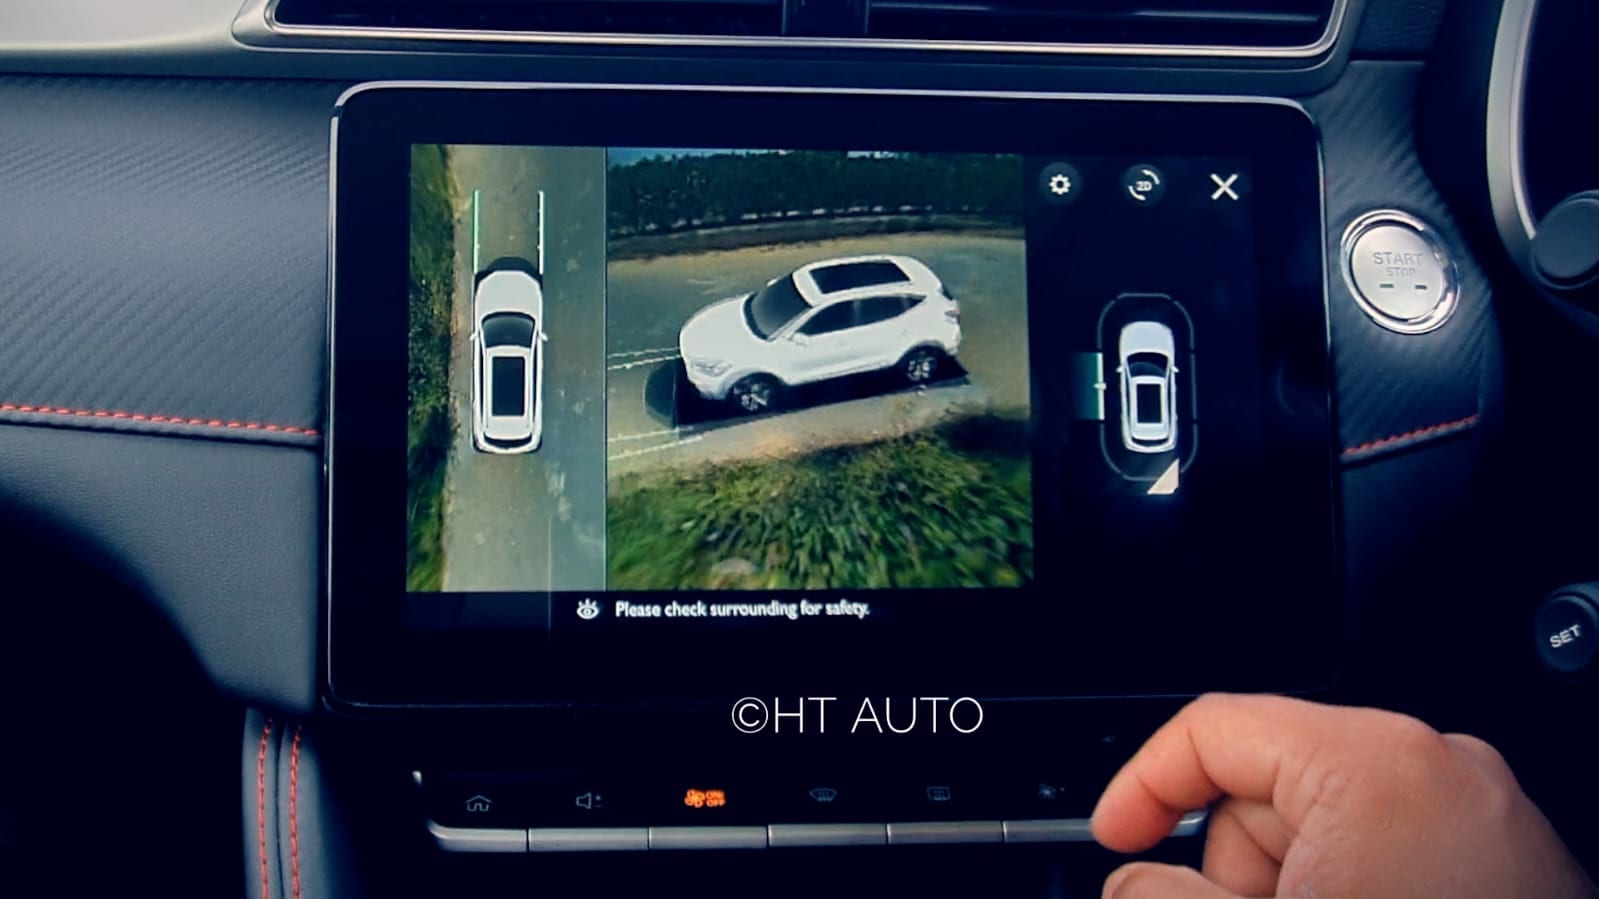 The 360-degree camera makes parking the ZS EV an easy task.